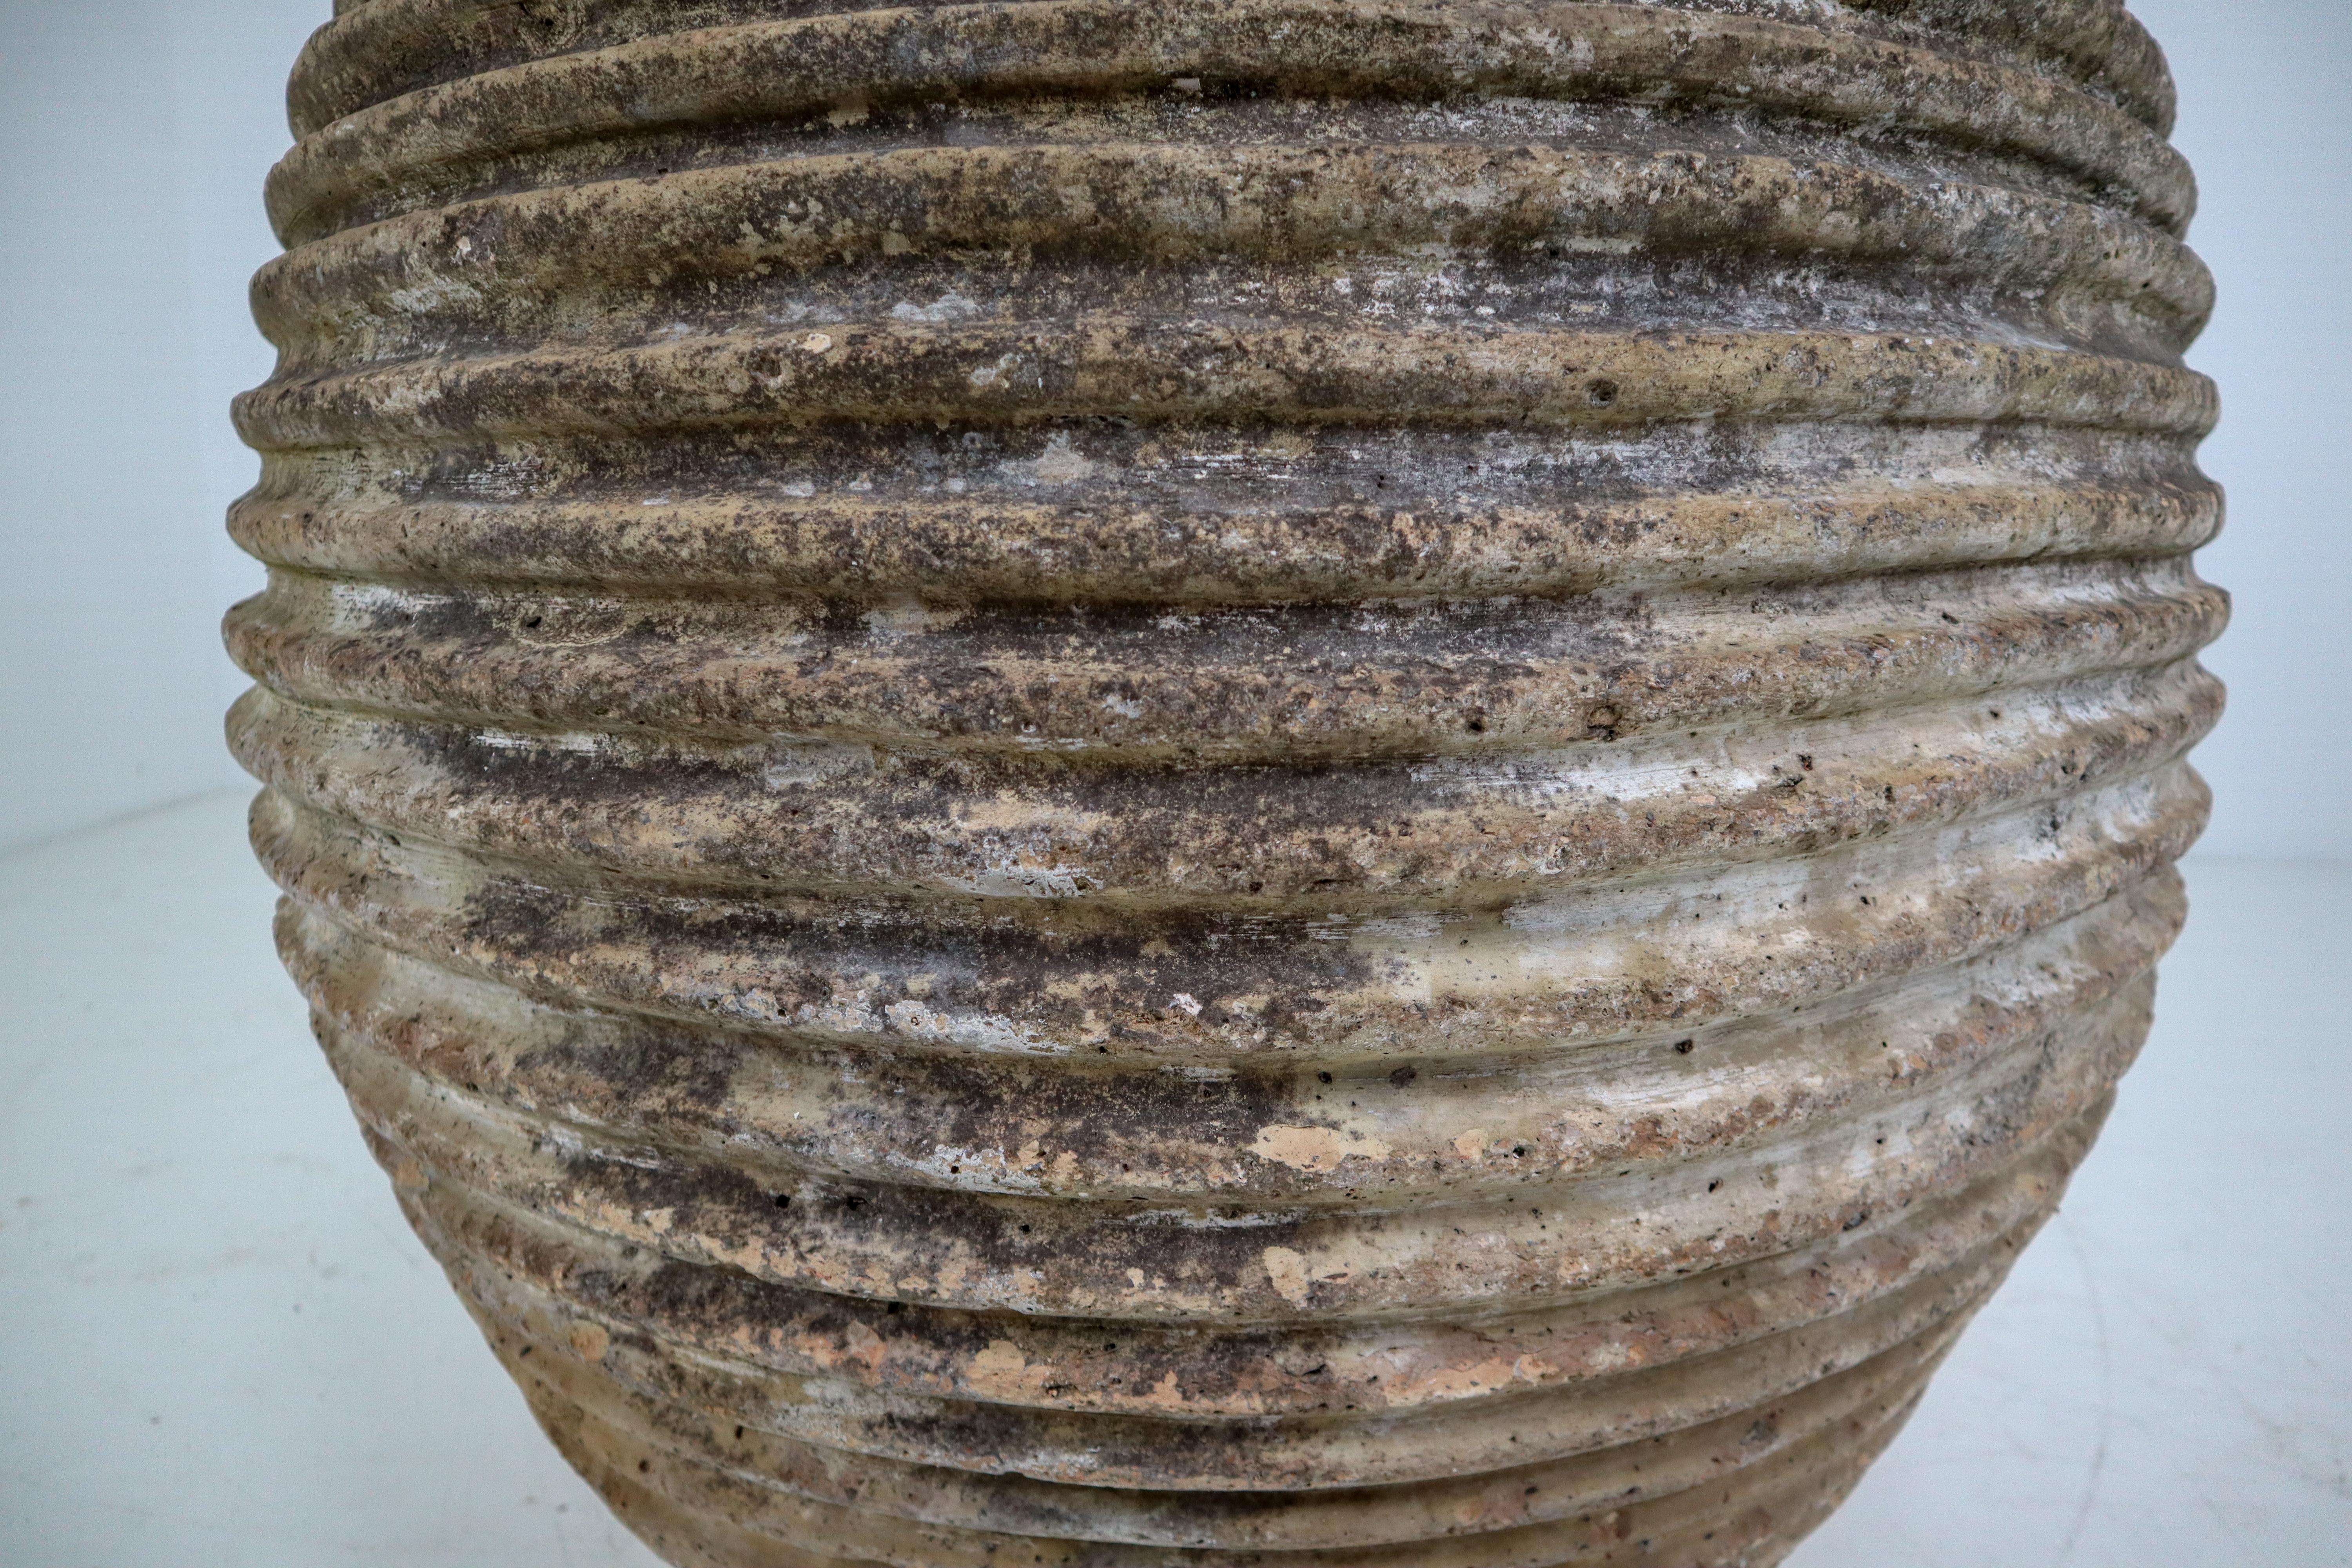 French Provincial 19th Century Greek 'King-Size' Ribbed Olive Jar with Dark Lichen Patination